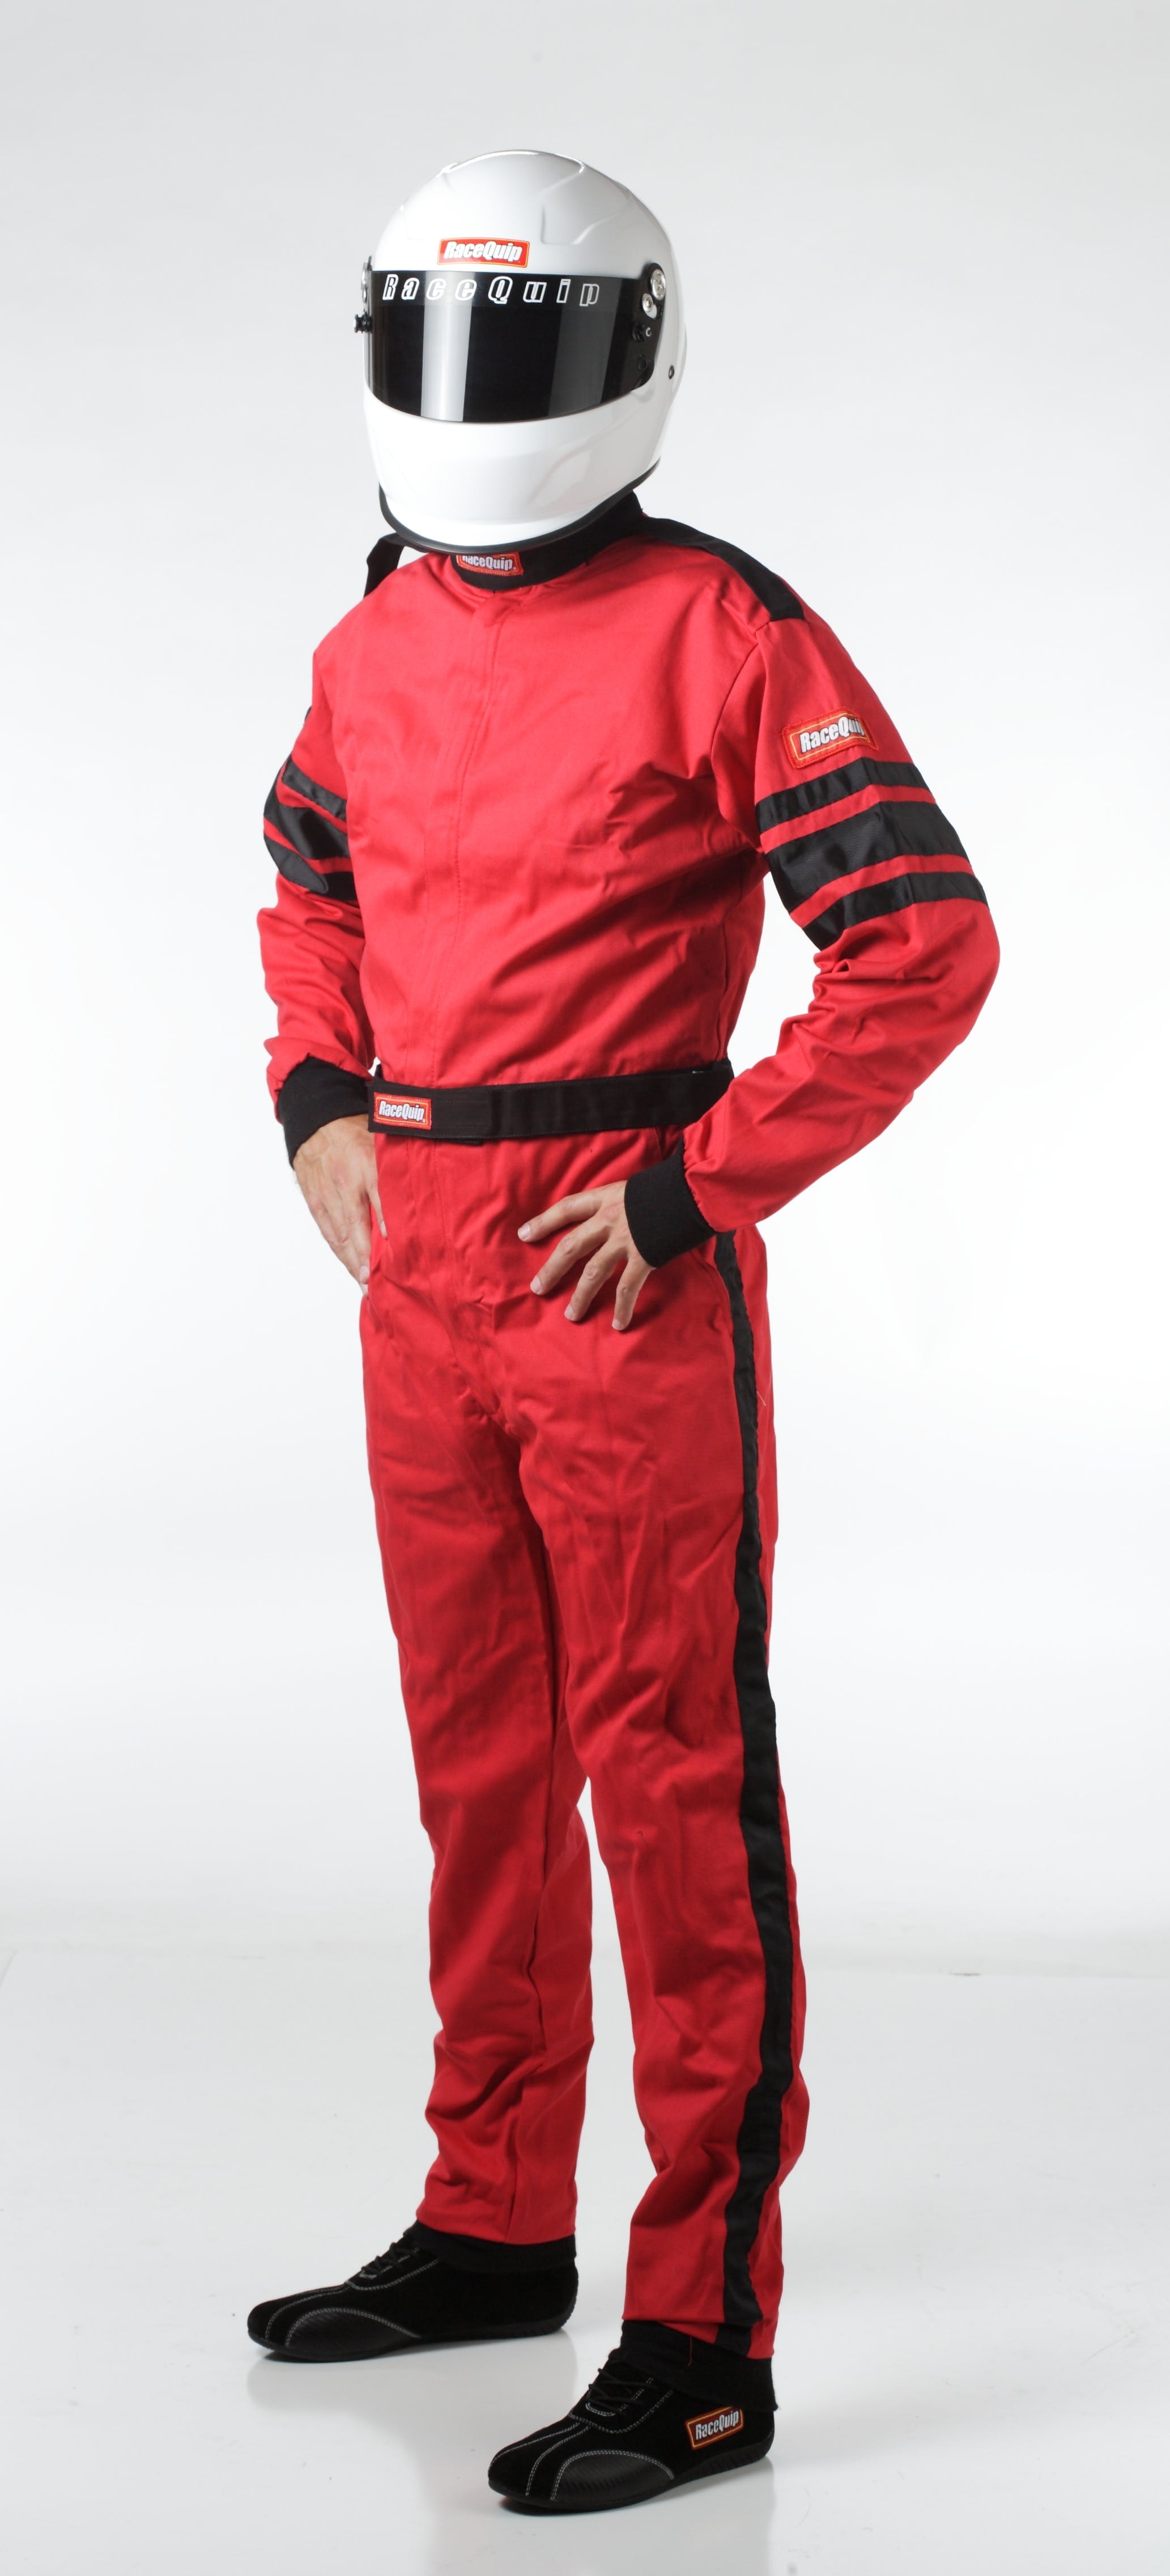 RaceQuip 110016 SFI-1 Pyrovatex One-Piece Single-Layer Racing Fire Suit (Red, X-Large)